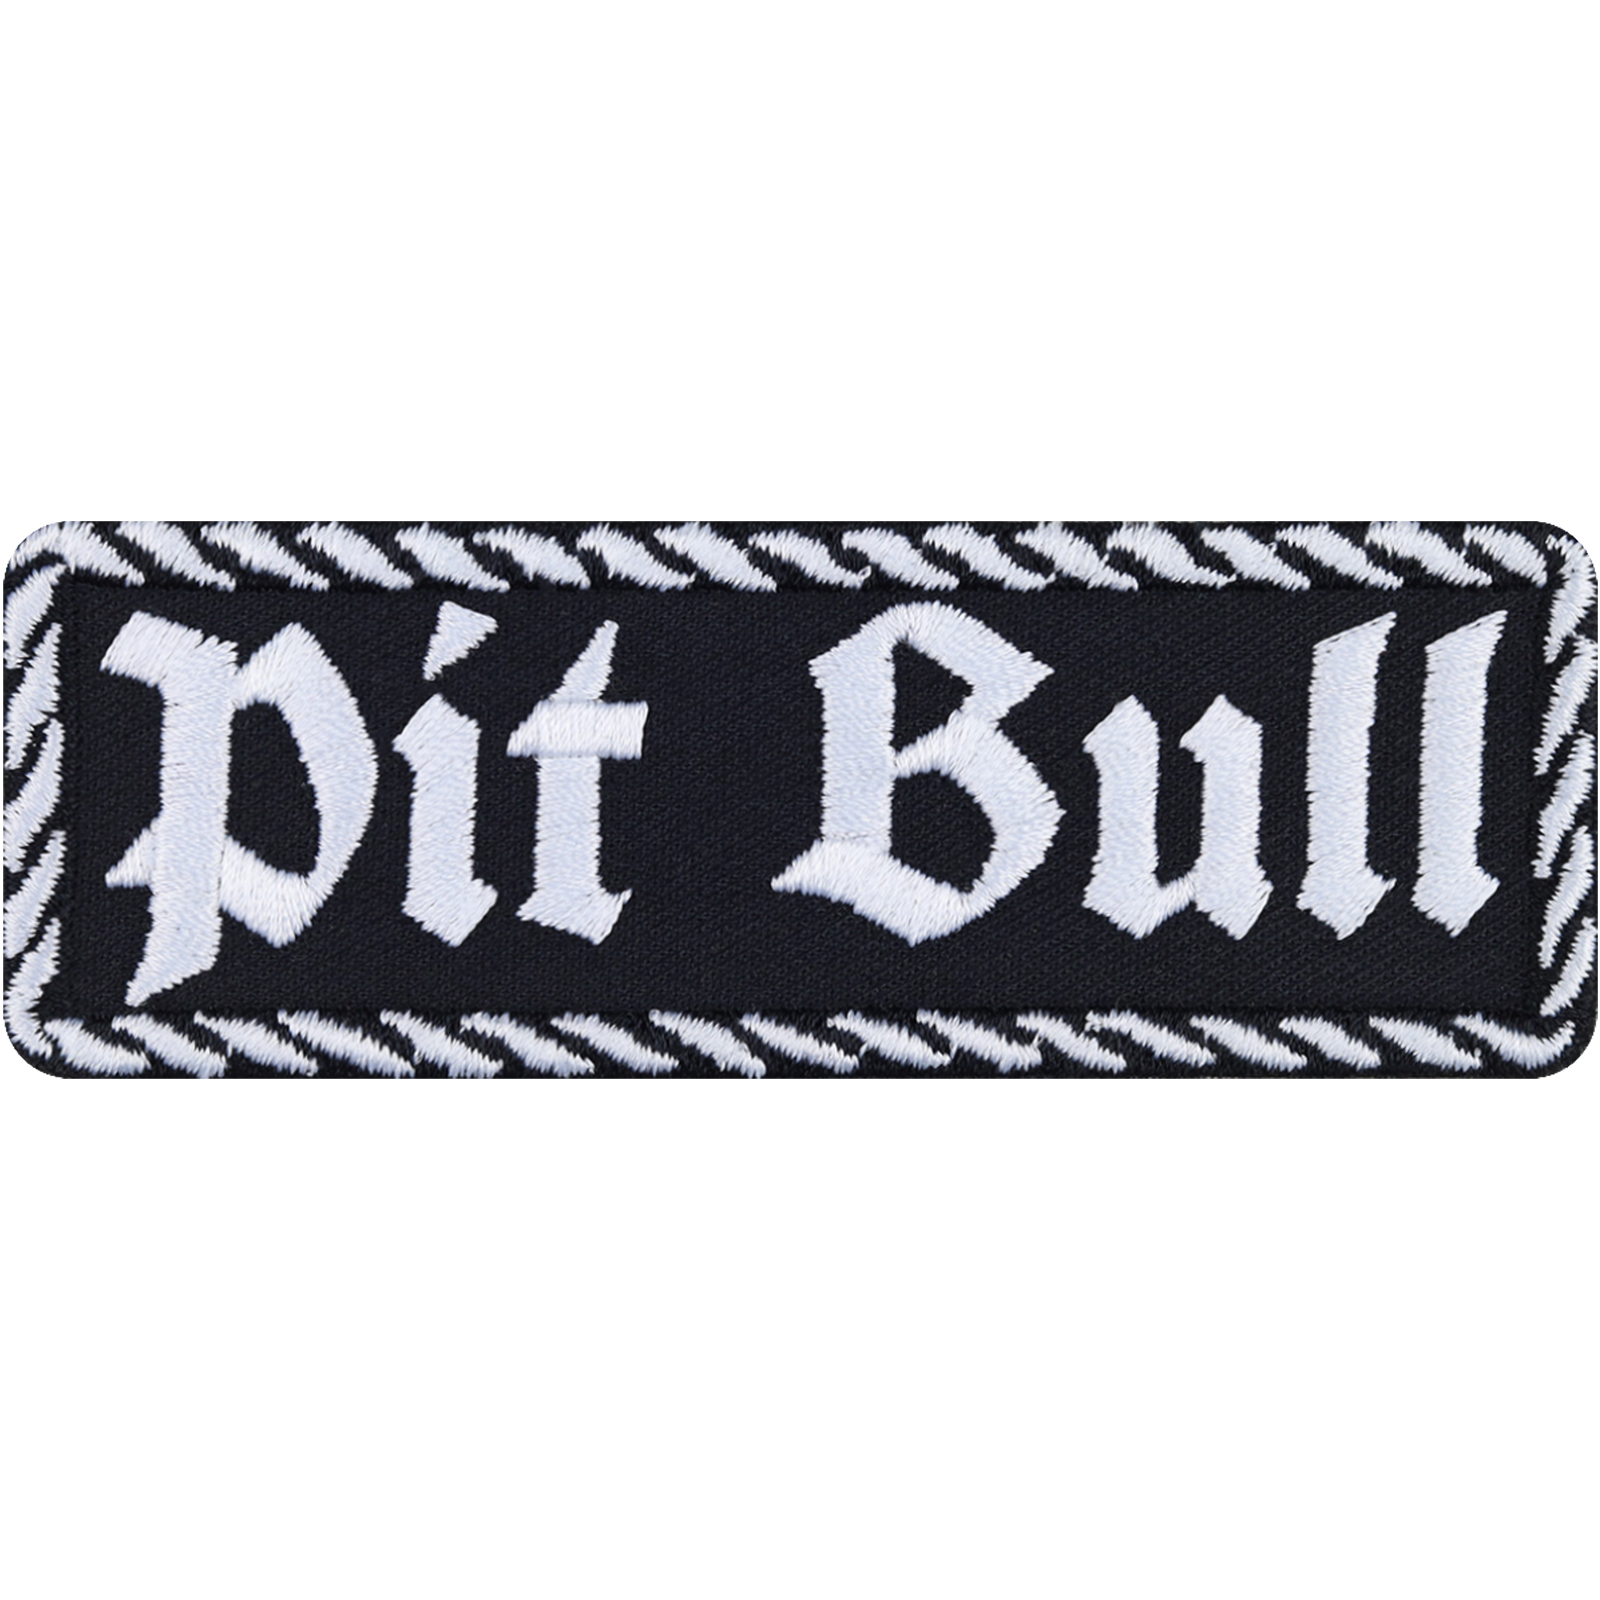 Pit Bull - Patch